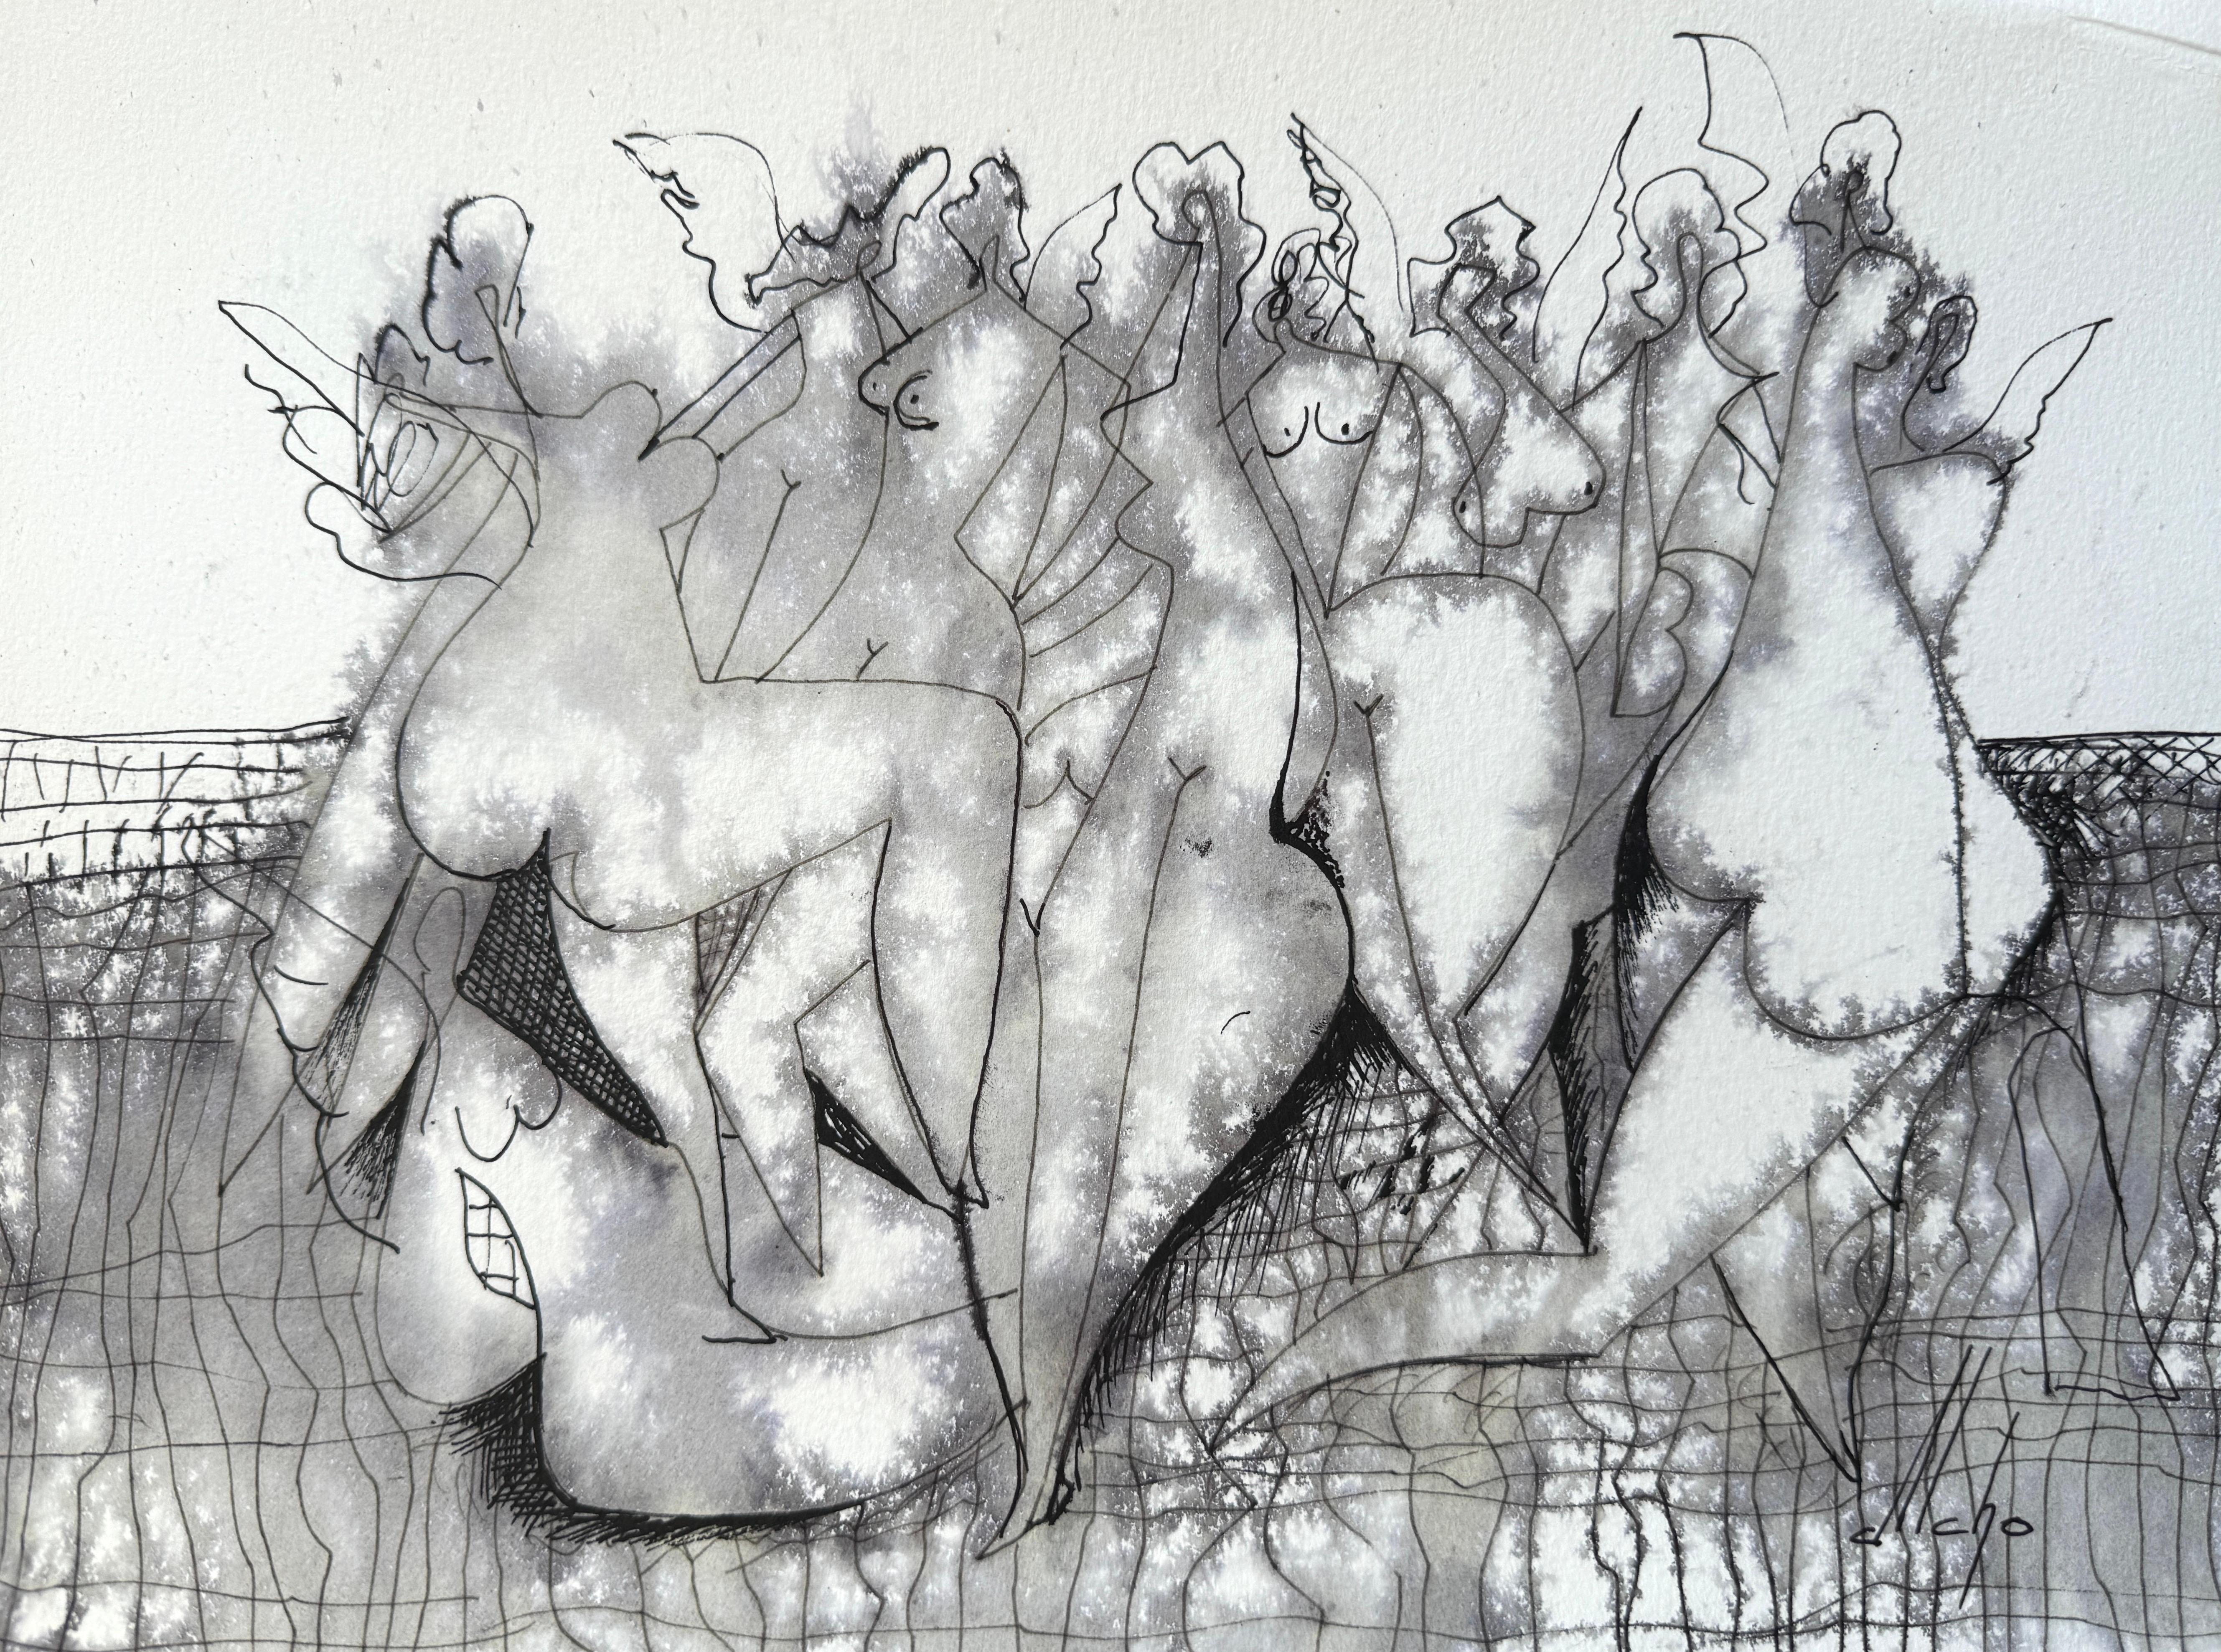 Angels, Figurative Original Painting, Ink on Paper, Black and White 